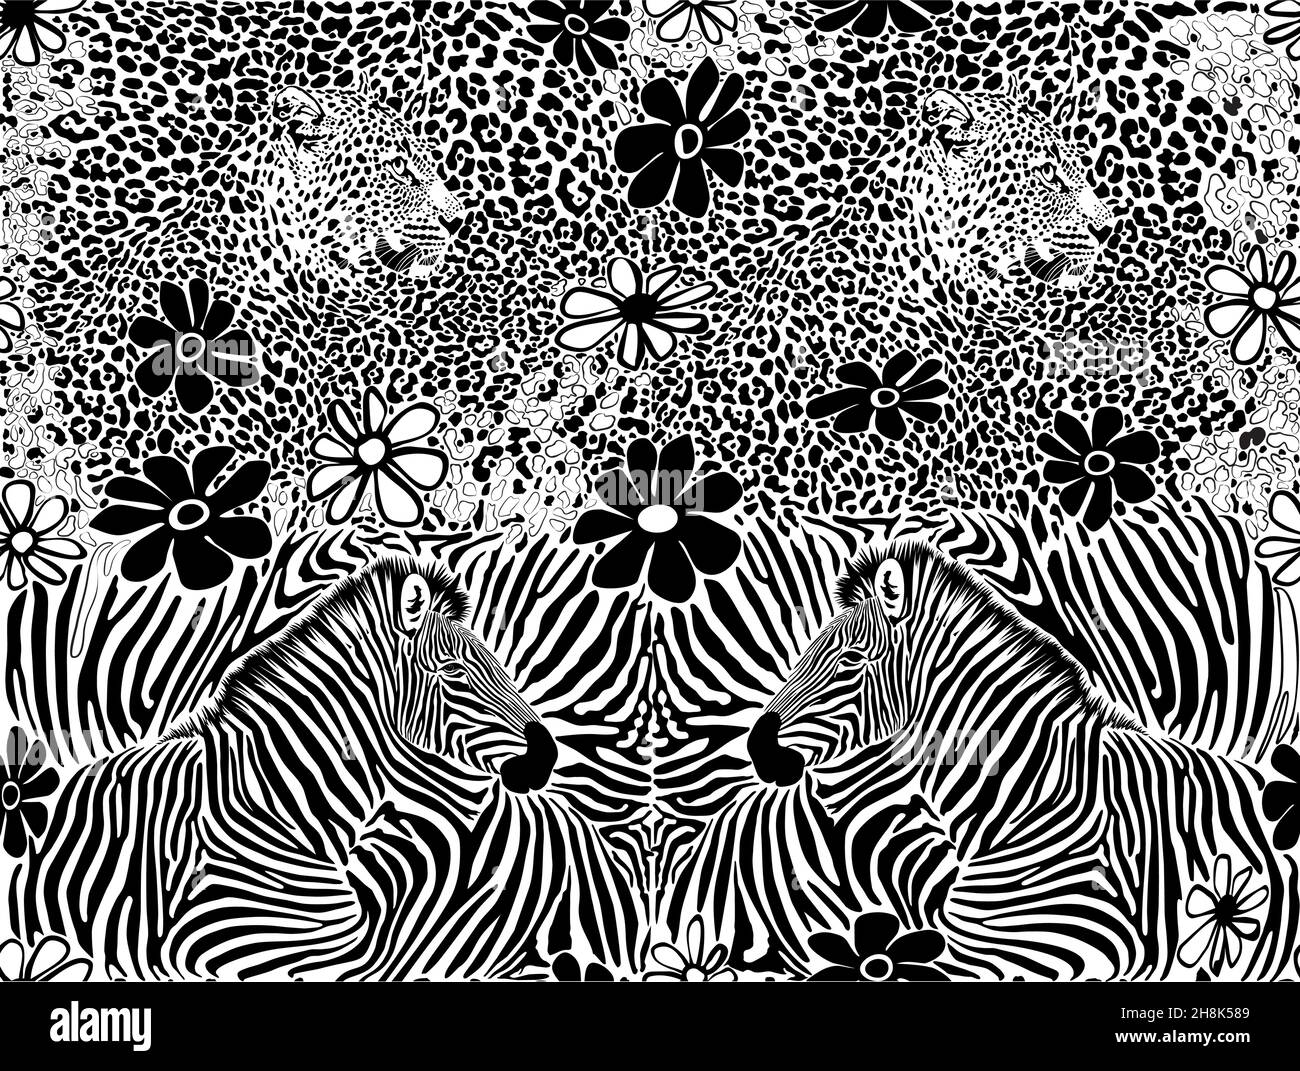 Camouflage and leopard and zebra heads with cartoon flowers Stock Vector